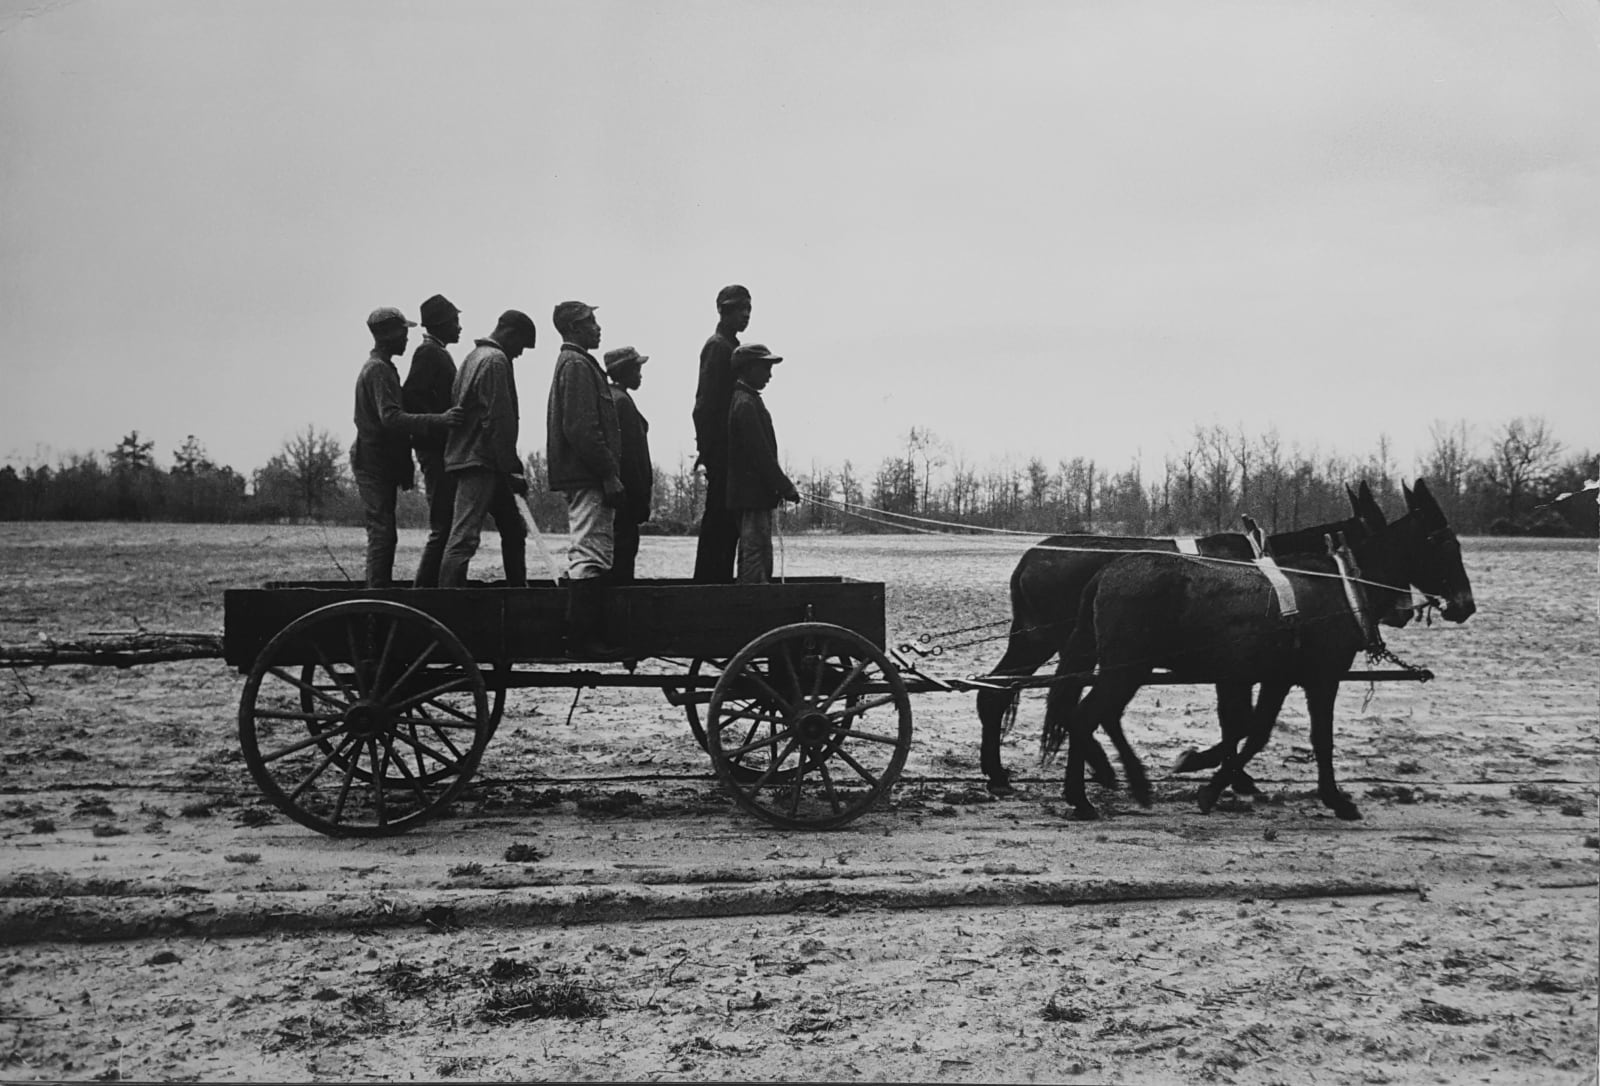 Constantine Manos, Untitled, Sharecroppers, South Carolina (7 men standing in a wagon), 1965